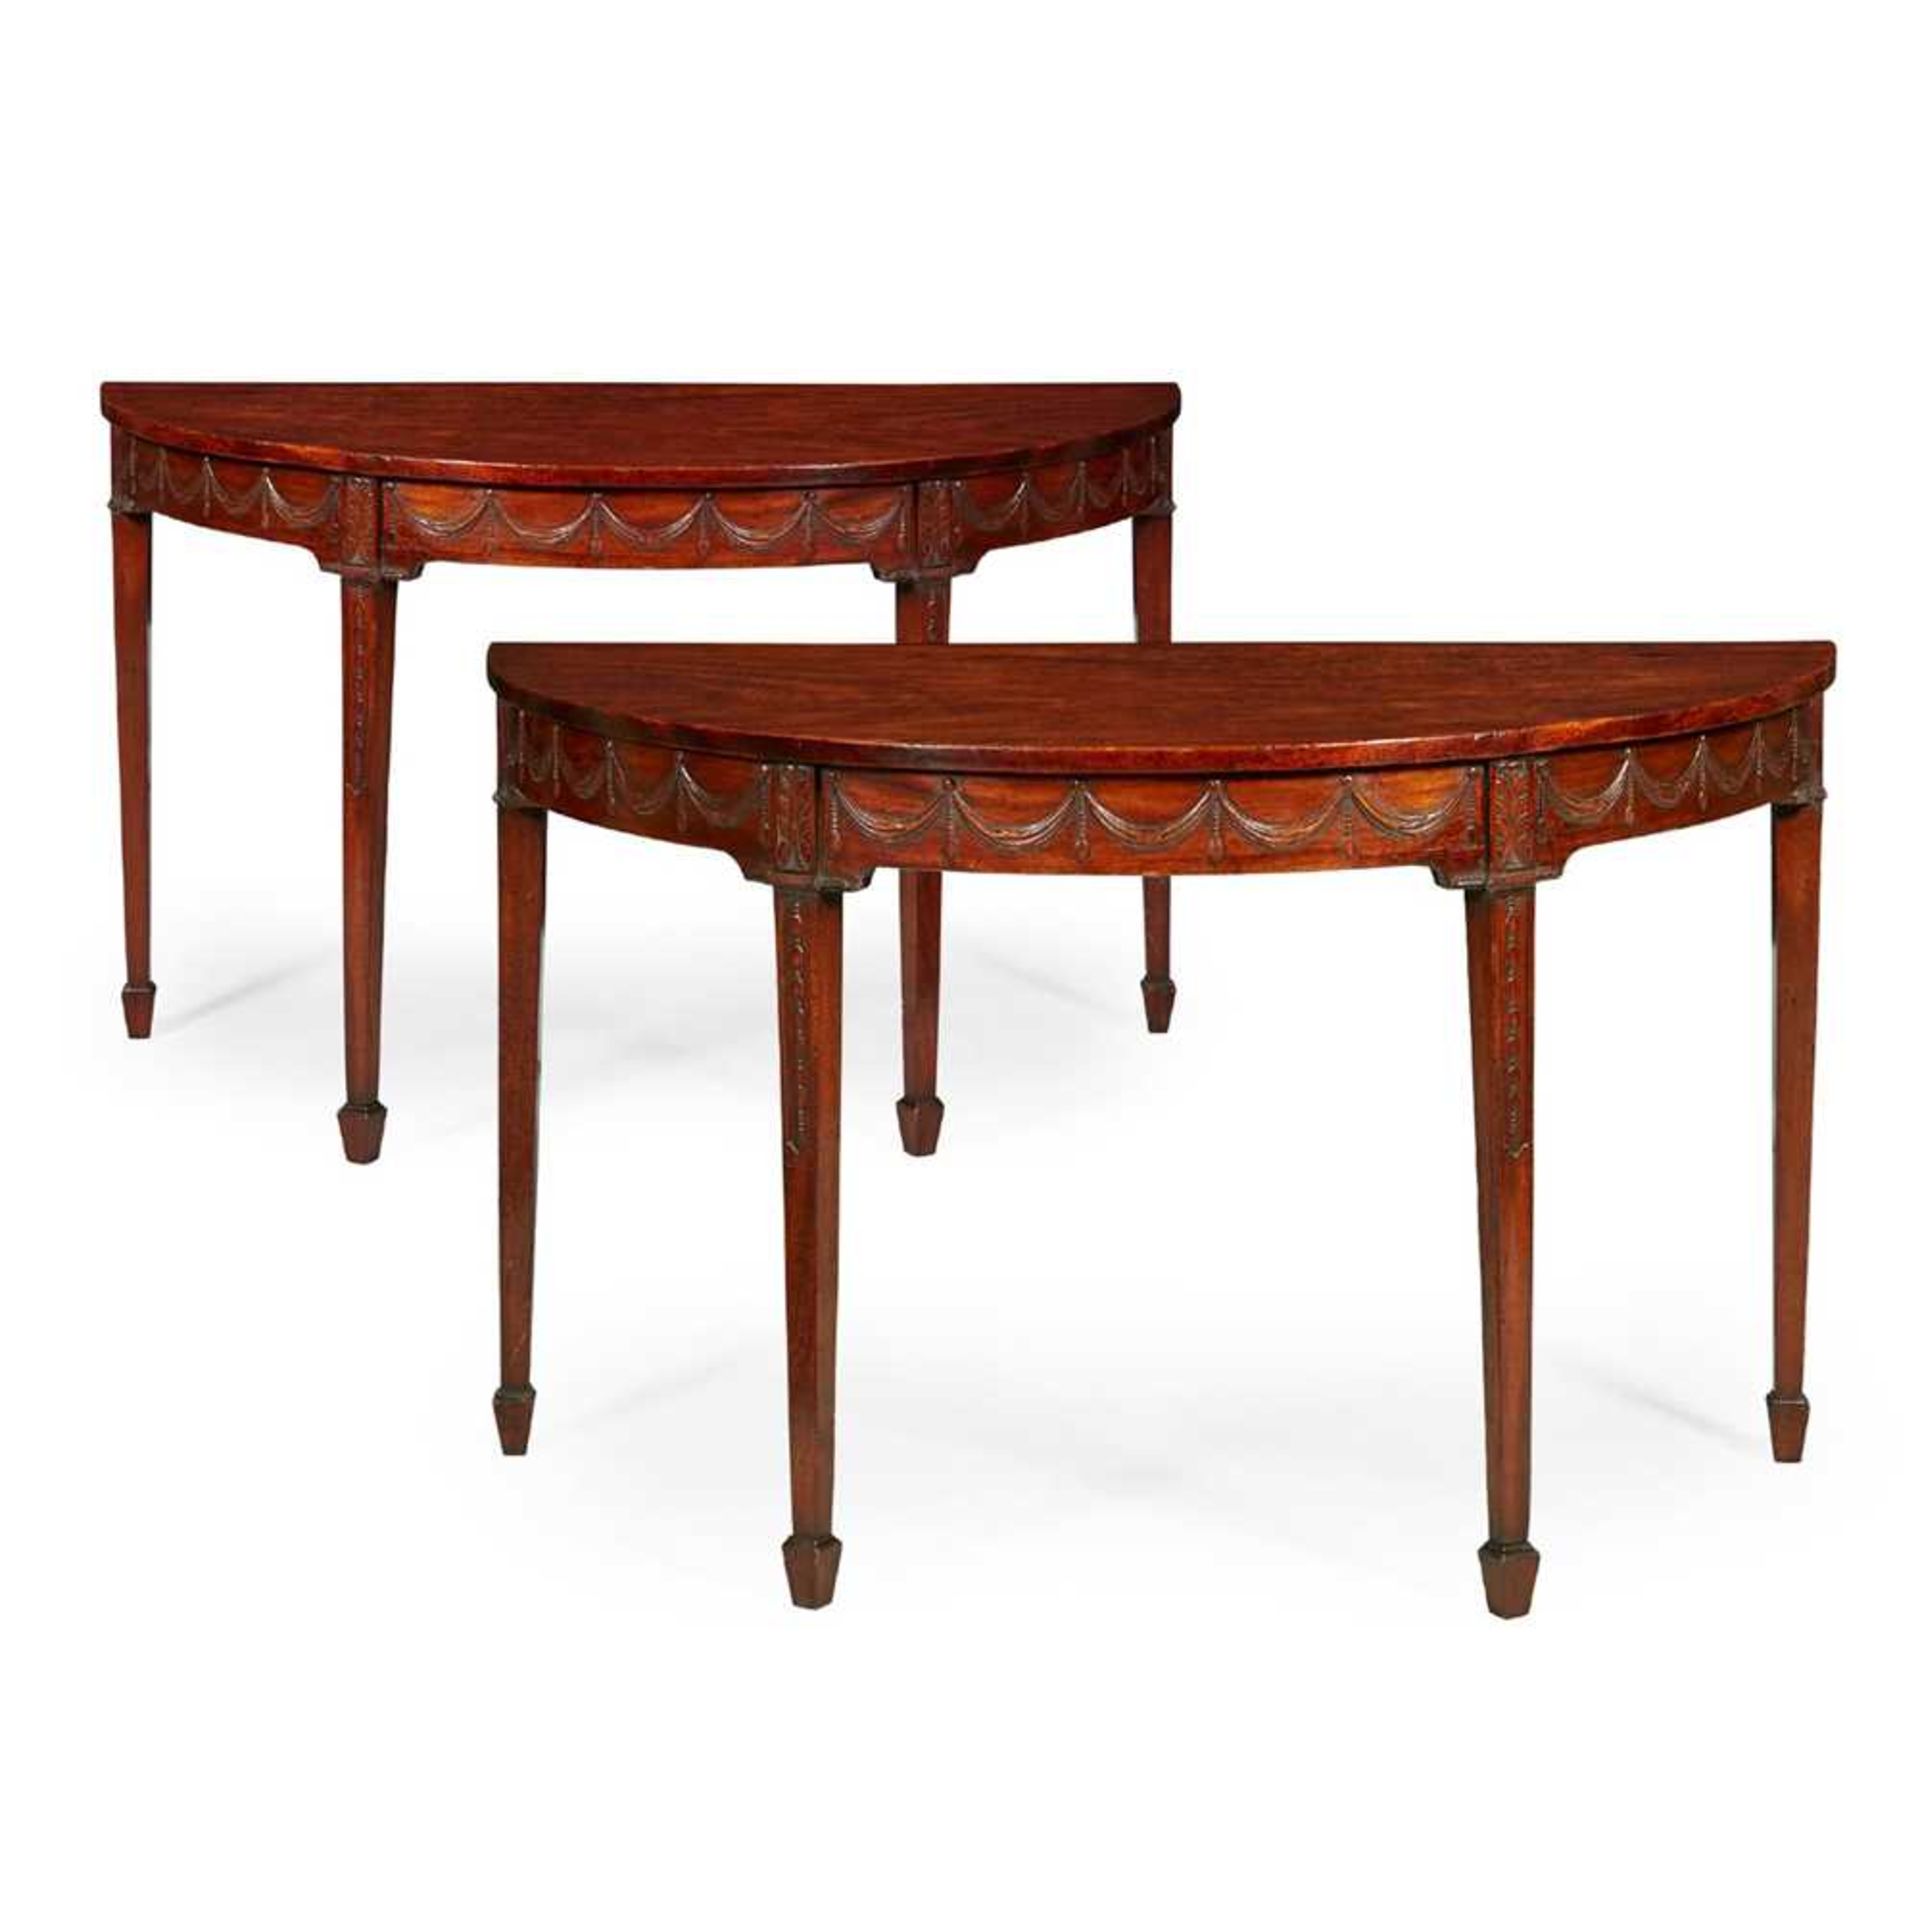 PAIR OF GEORGE III MAHOGANY DEMILUNE SIDE TABLES LATE 18TH CENTURY